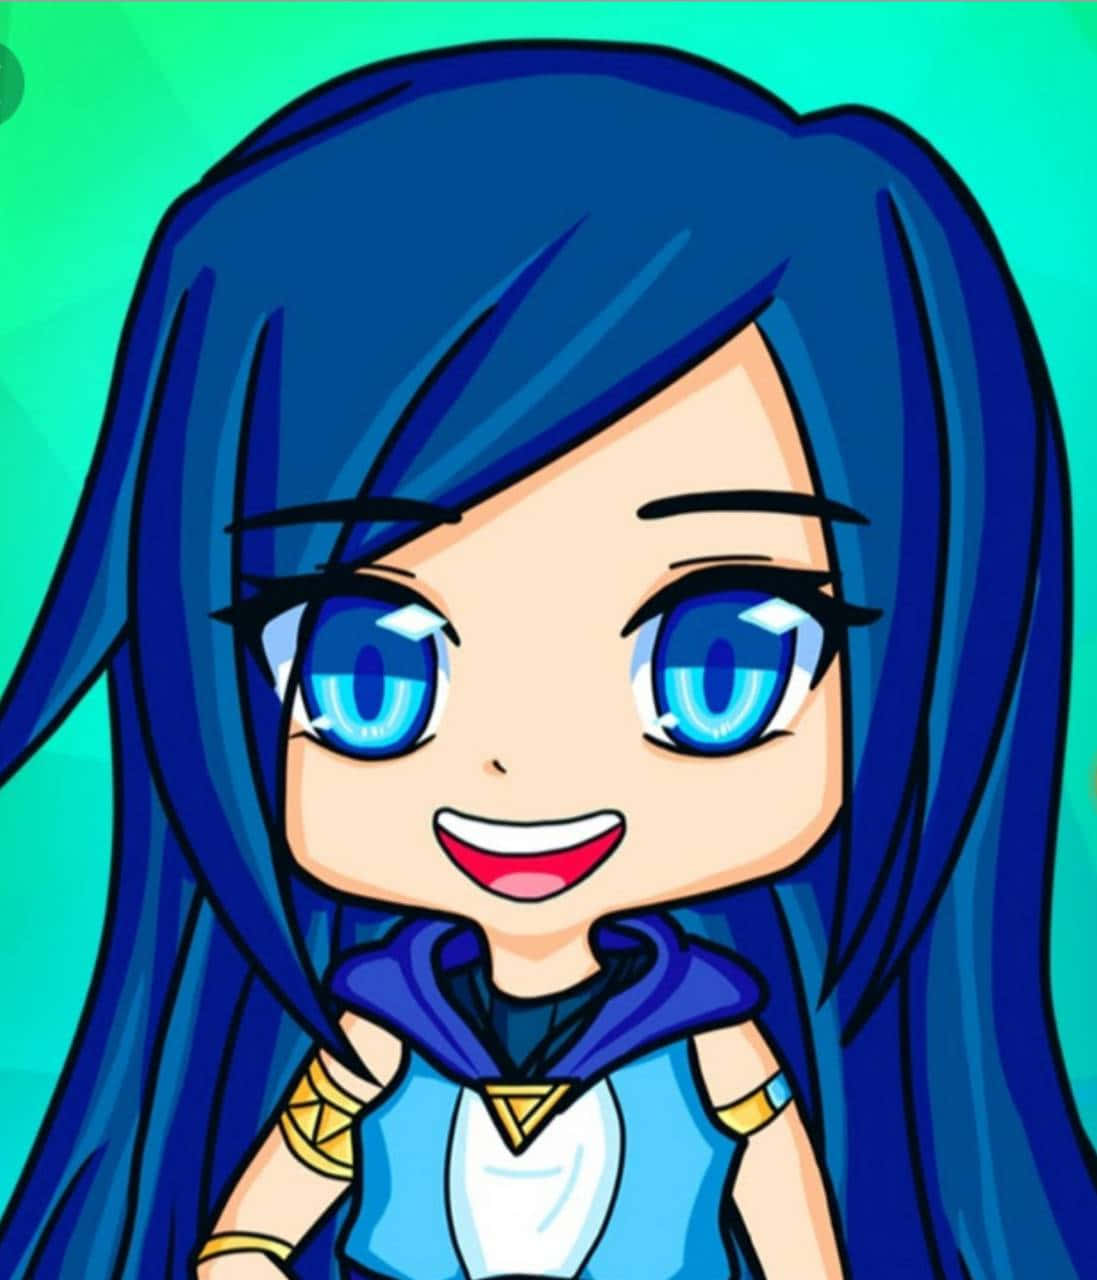 A Cartoon Girl With Blue Hair And Blue Eyes Wallpaper